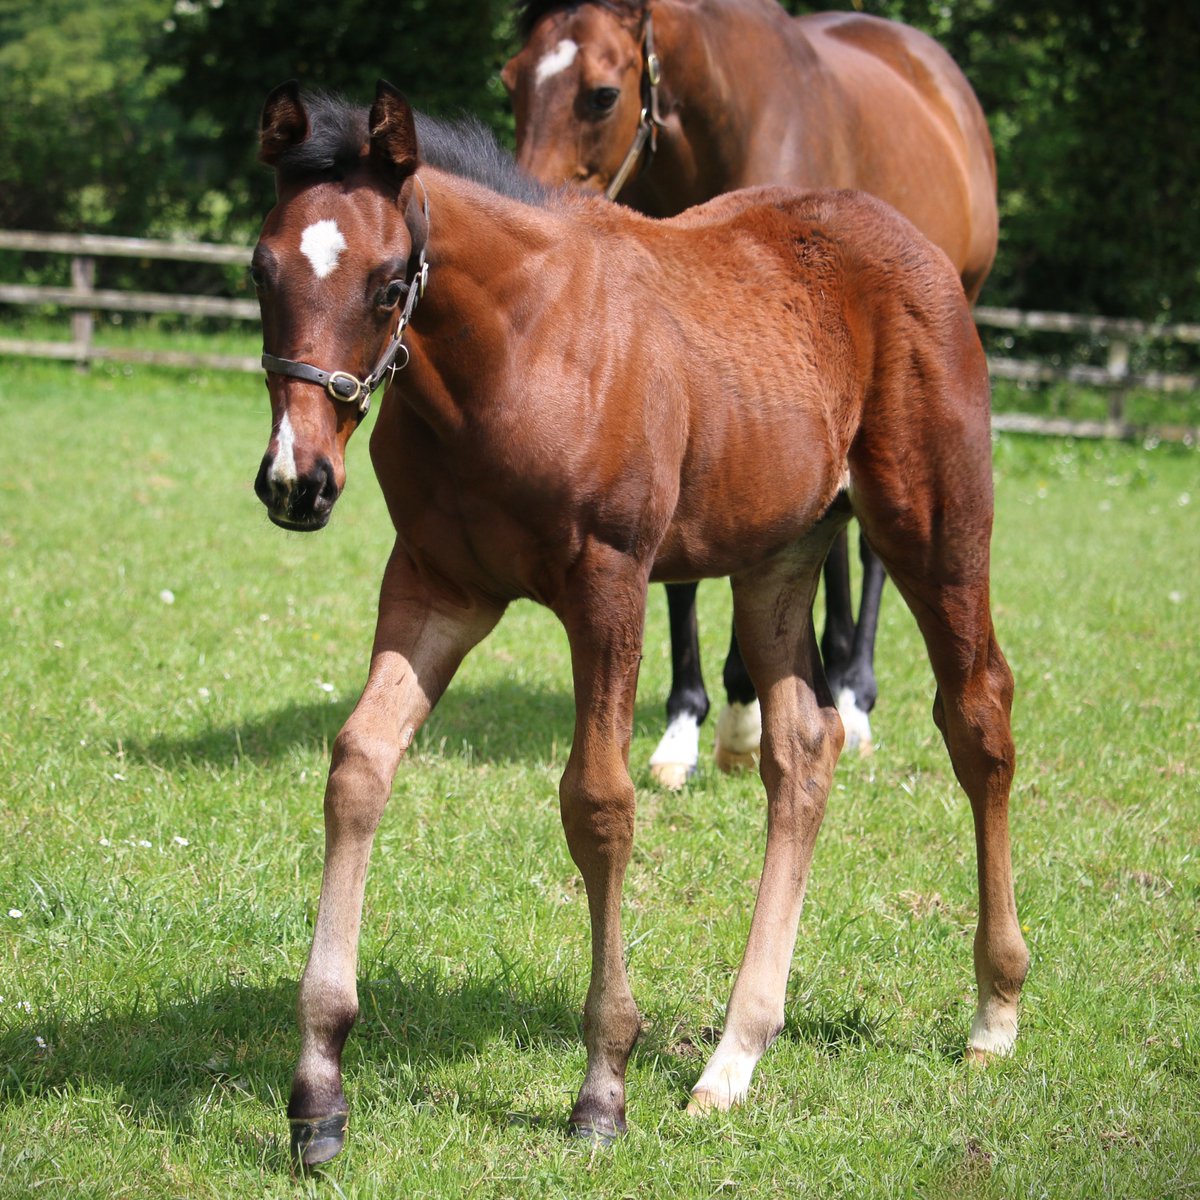 🌟 A half-brother to Classic heroine #Rouhiya! 🌟 This #Siyouni colt is out of #Rondonia, dam of last Sunday's winner of the Gr.1 Poule d'Essai des Pouliches. She visits #SeaTheStars this year. #FoalFriday #RPFoalGallery #FoalWatch